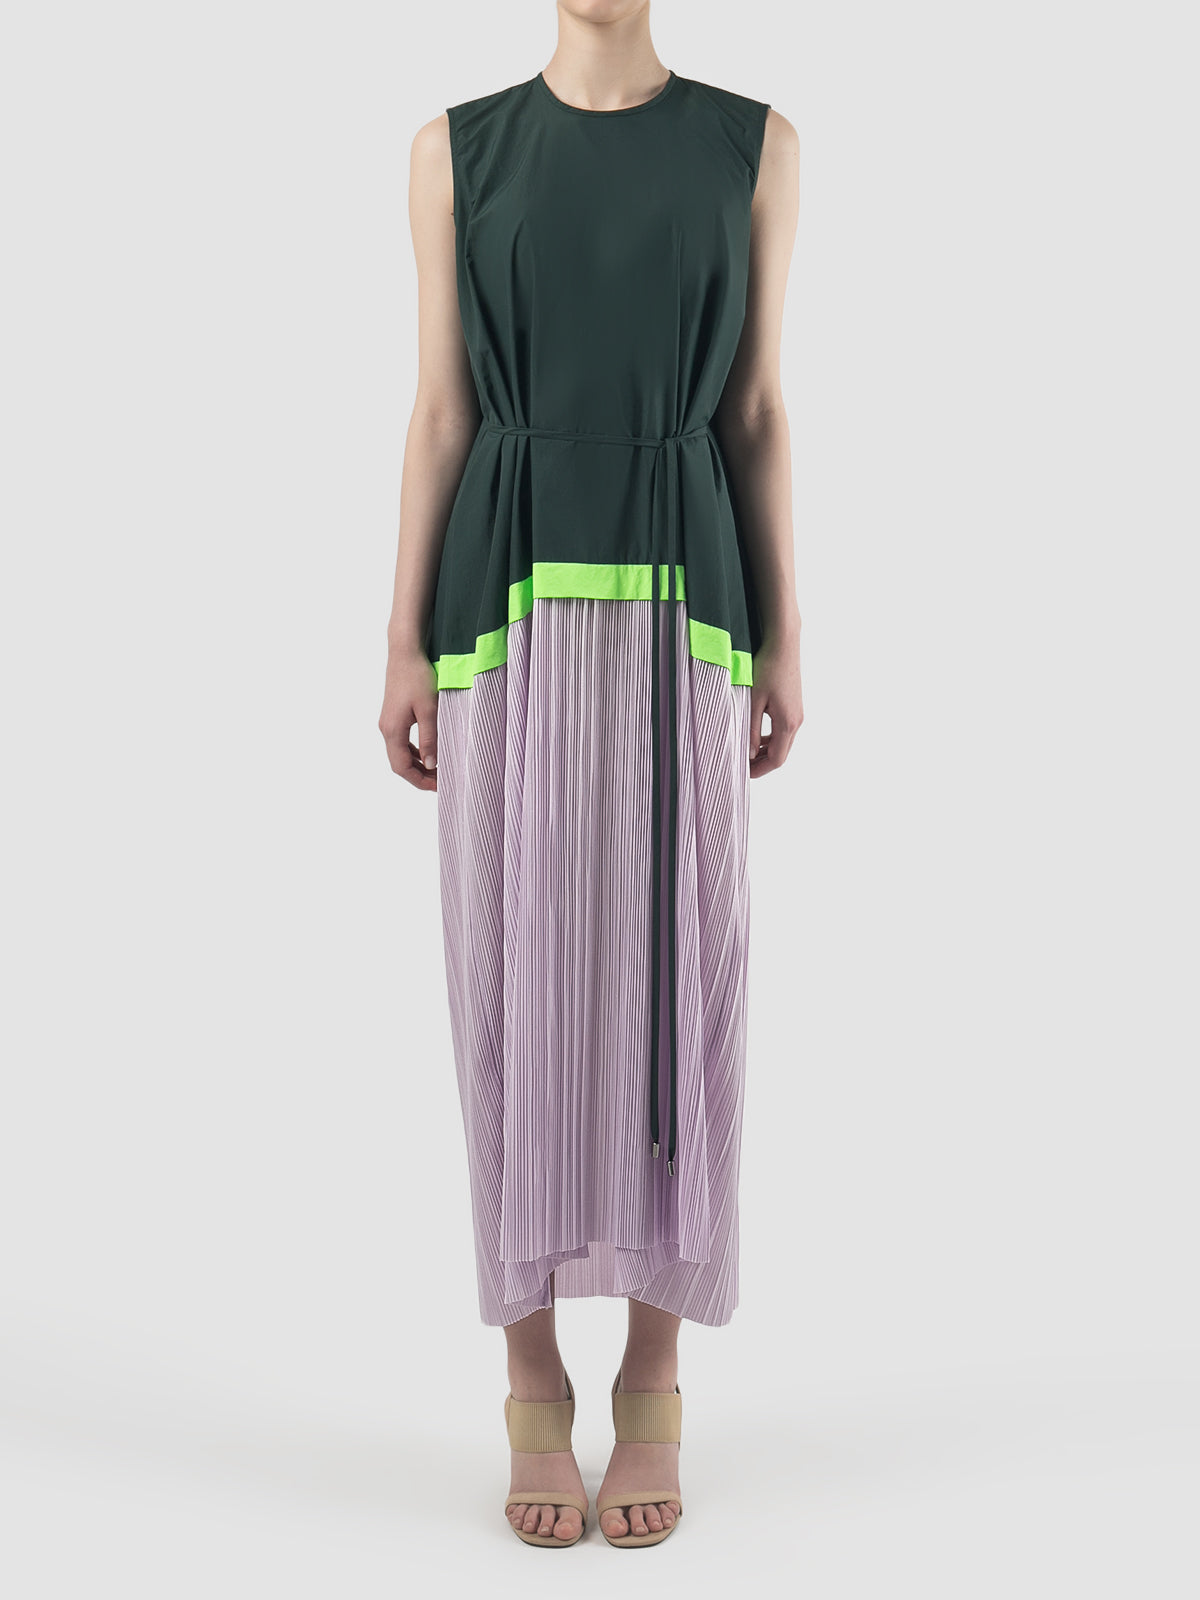 Composer forest green and lilac midi dress